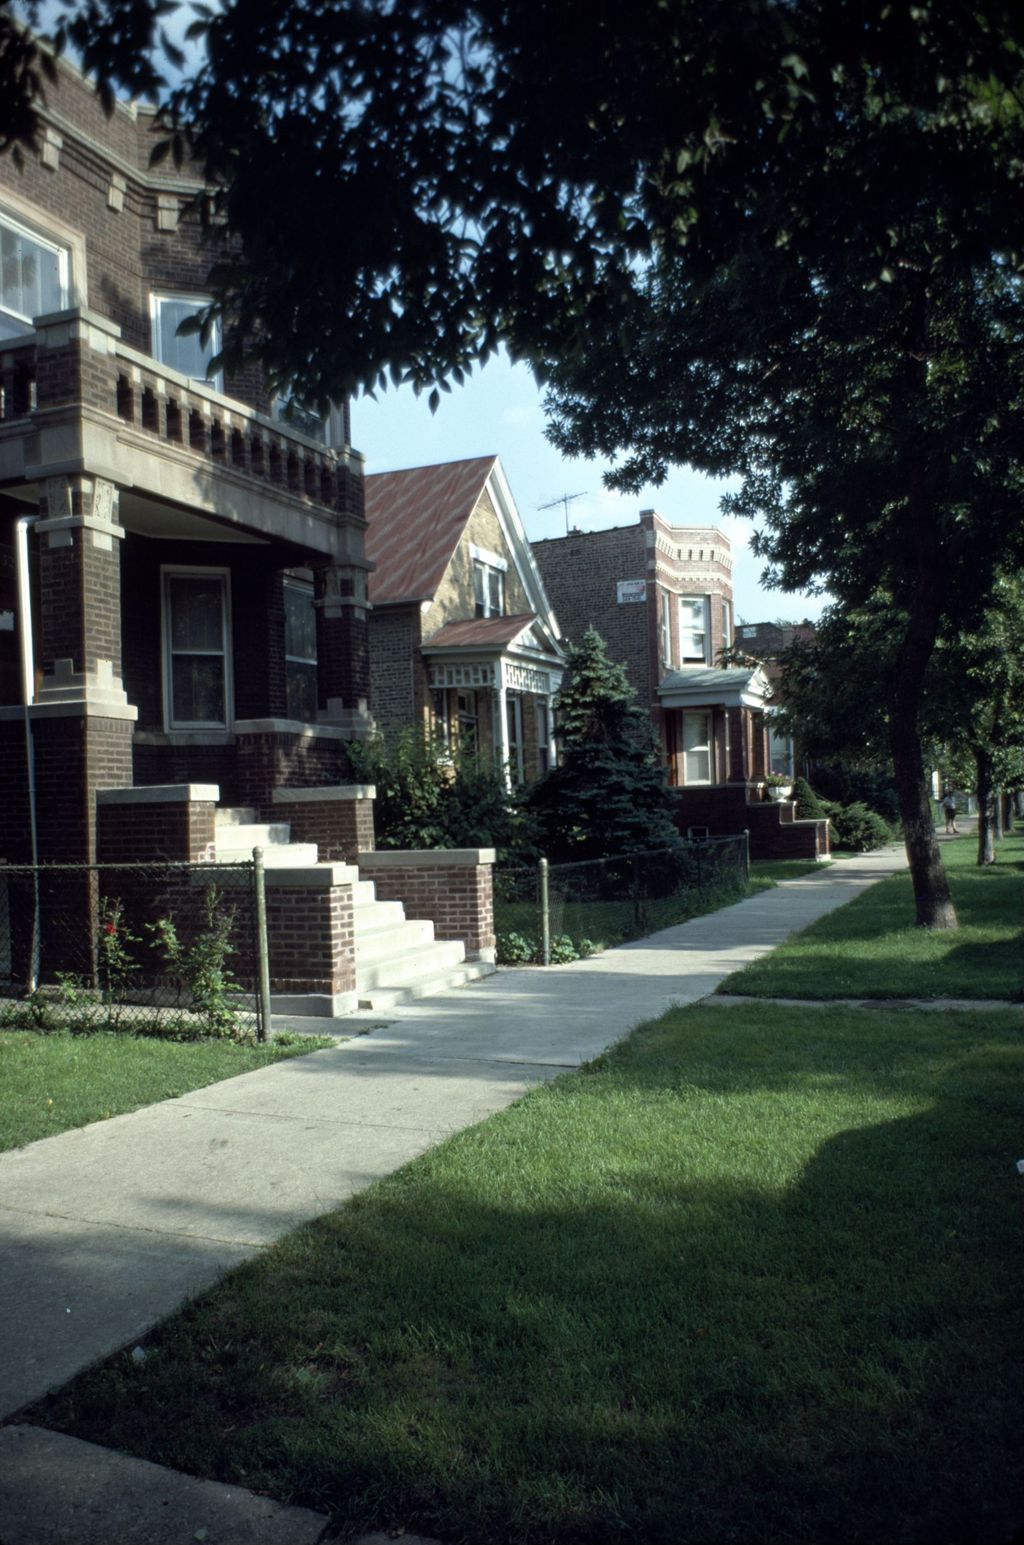 Apartments and houses, North Springfield Avenue